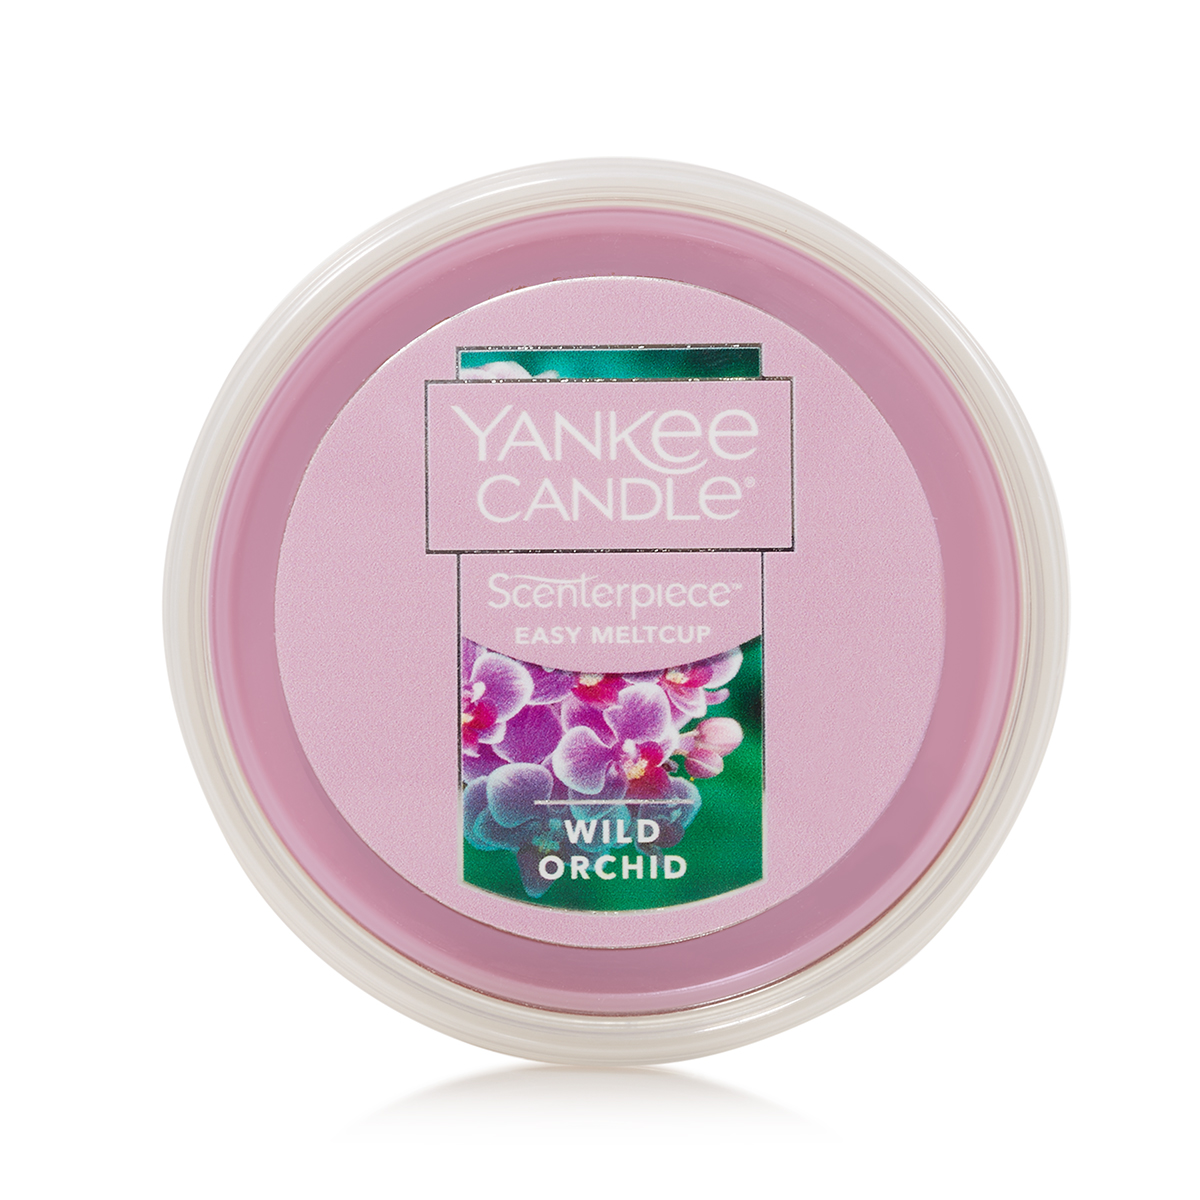 Yankee Candle(R) Wild Orchid Scenterpiece(tm) Melt Cup